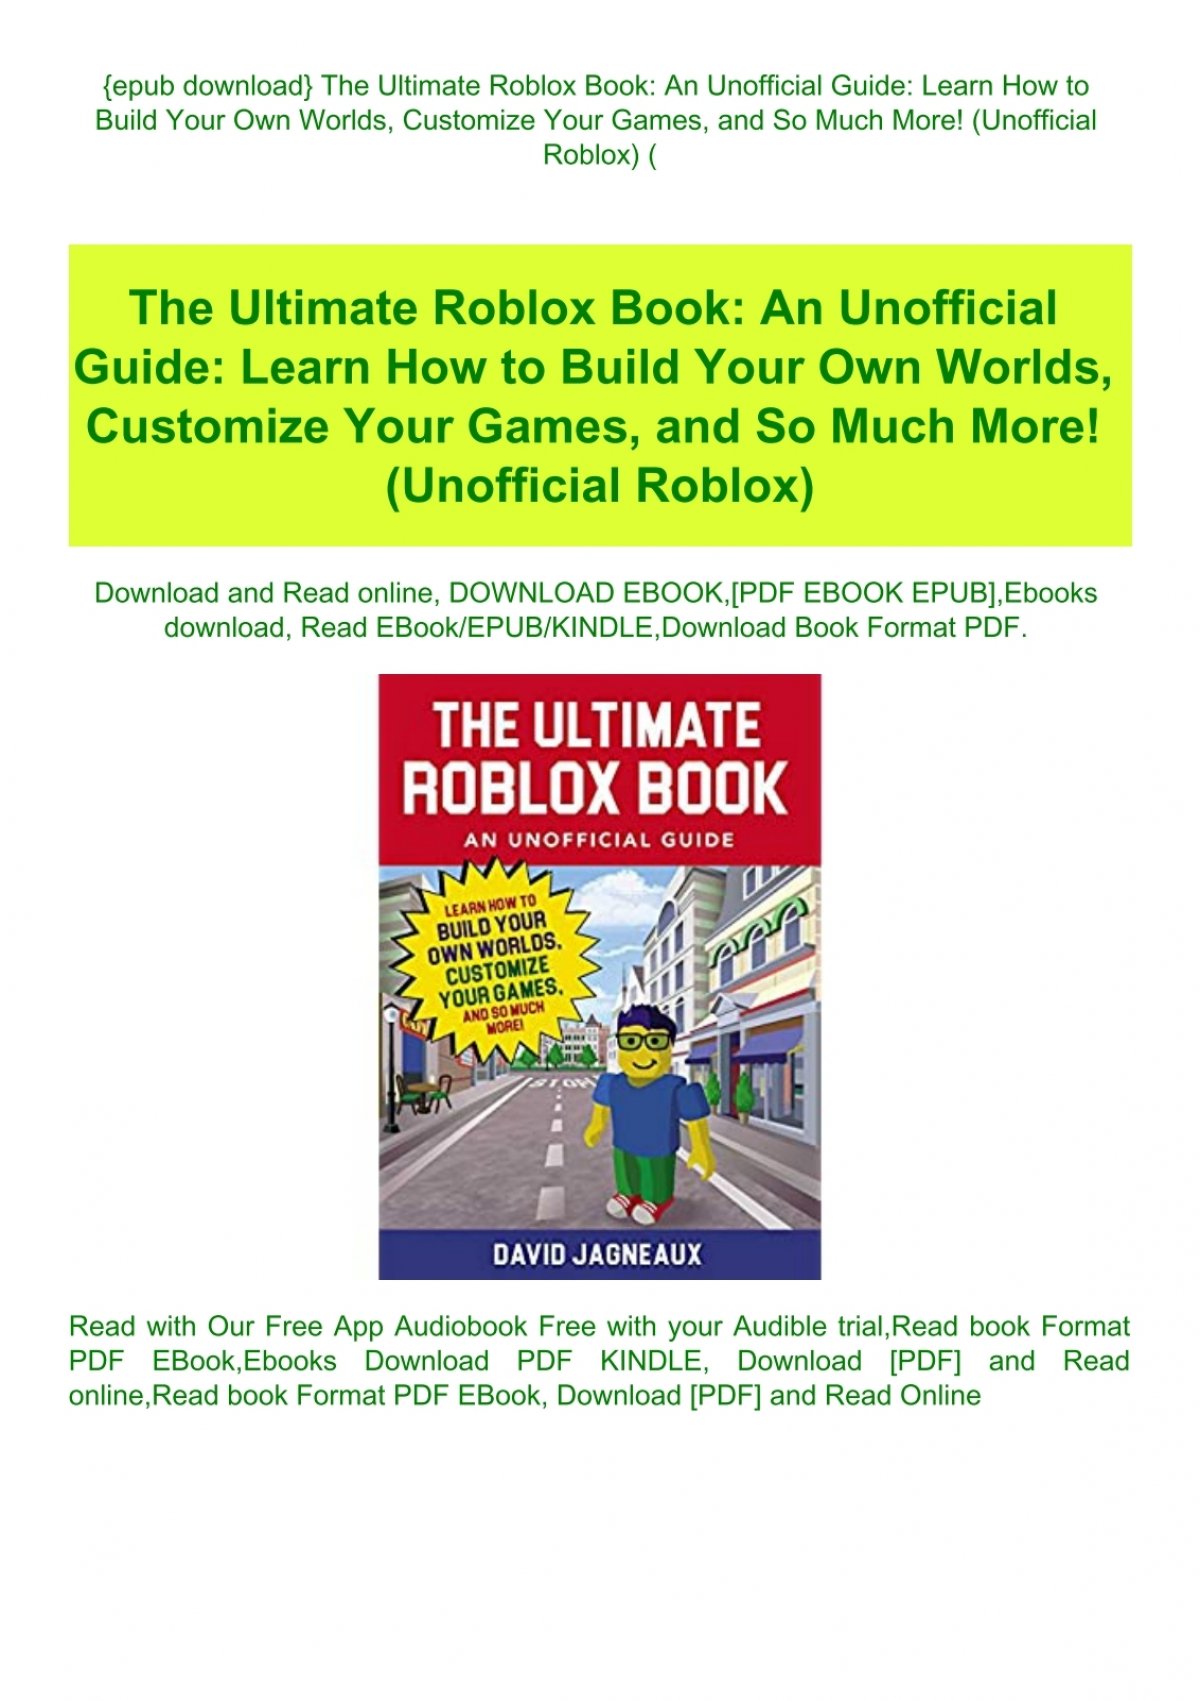 How To Get Roblox For Free On Kindle